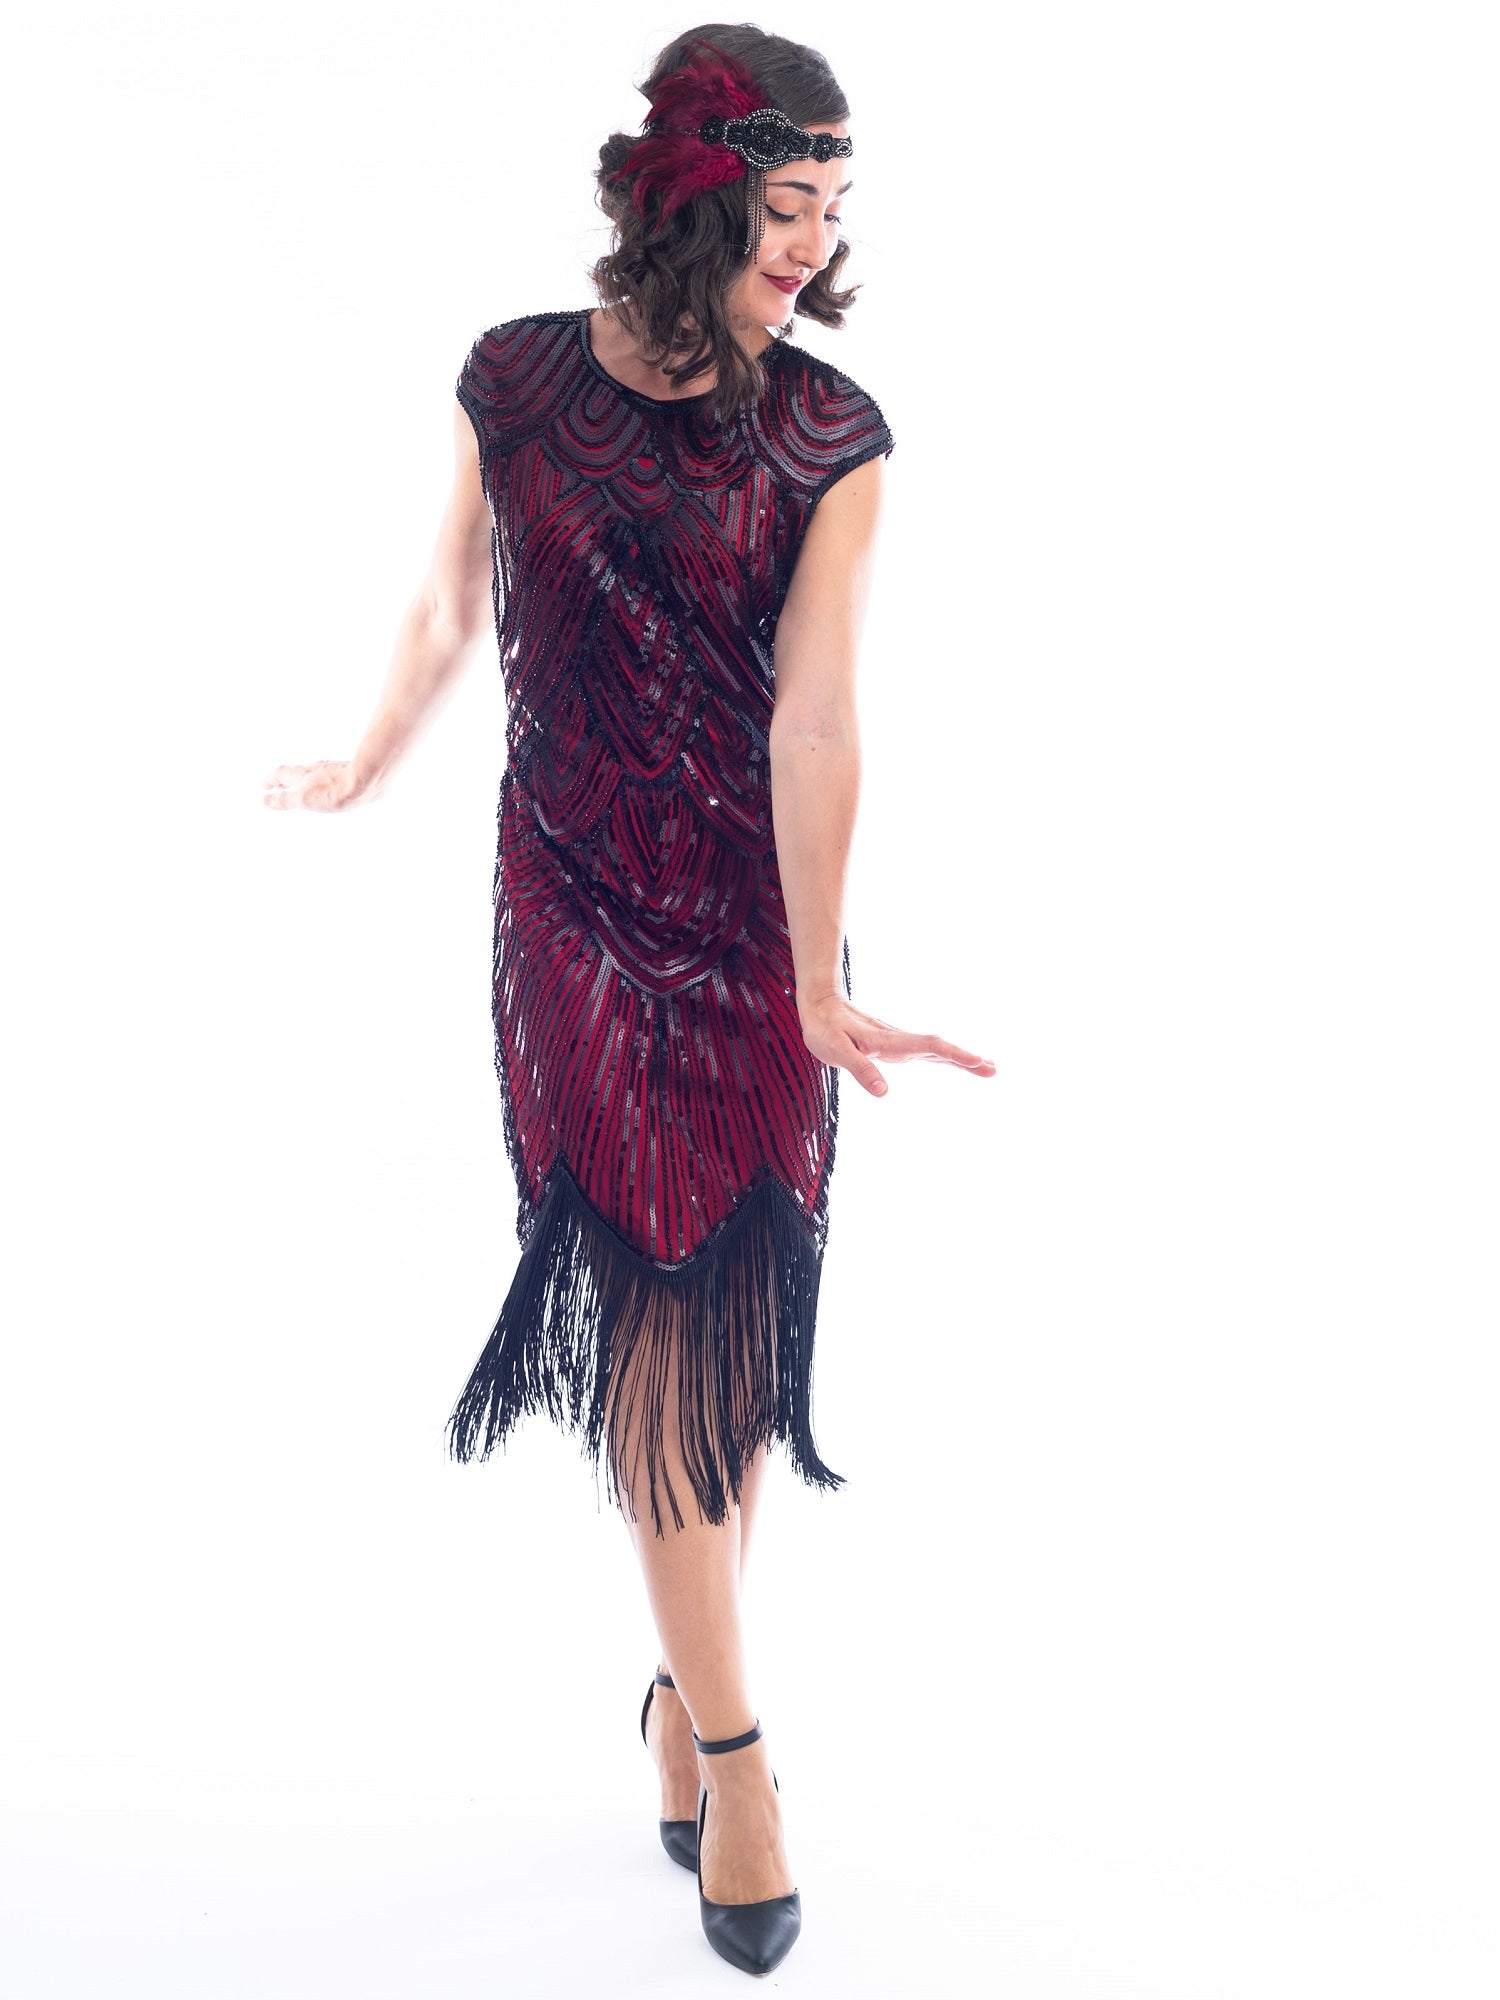 An action view of a vintage red 1920s Flapper Dress with black beads